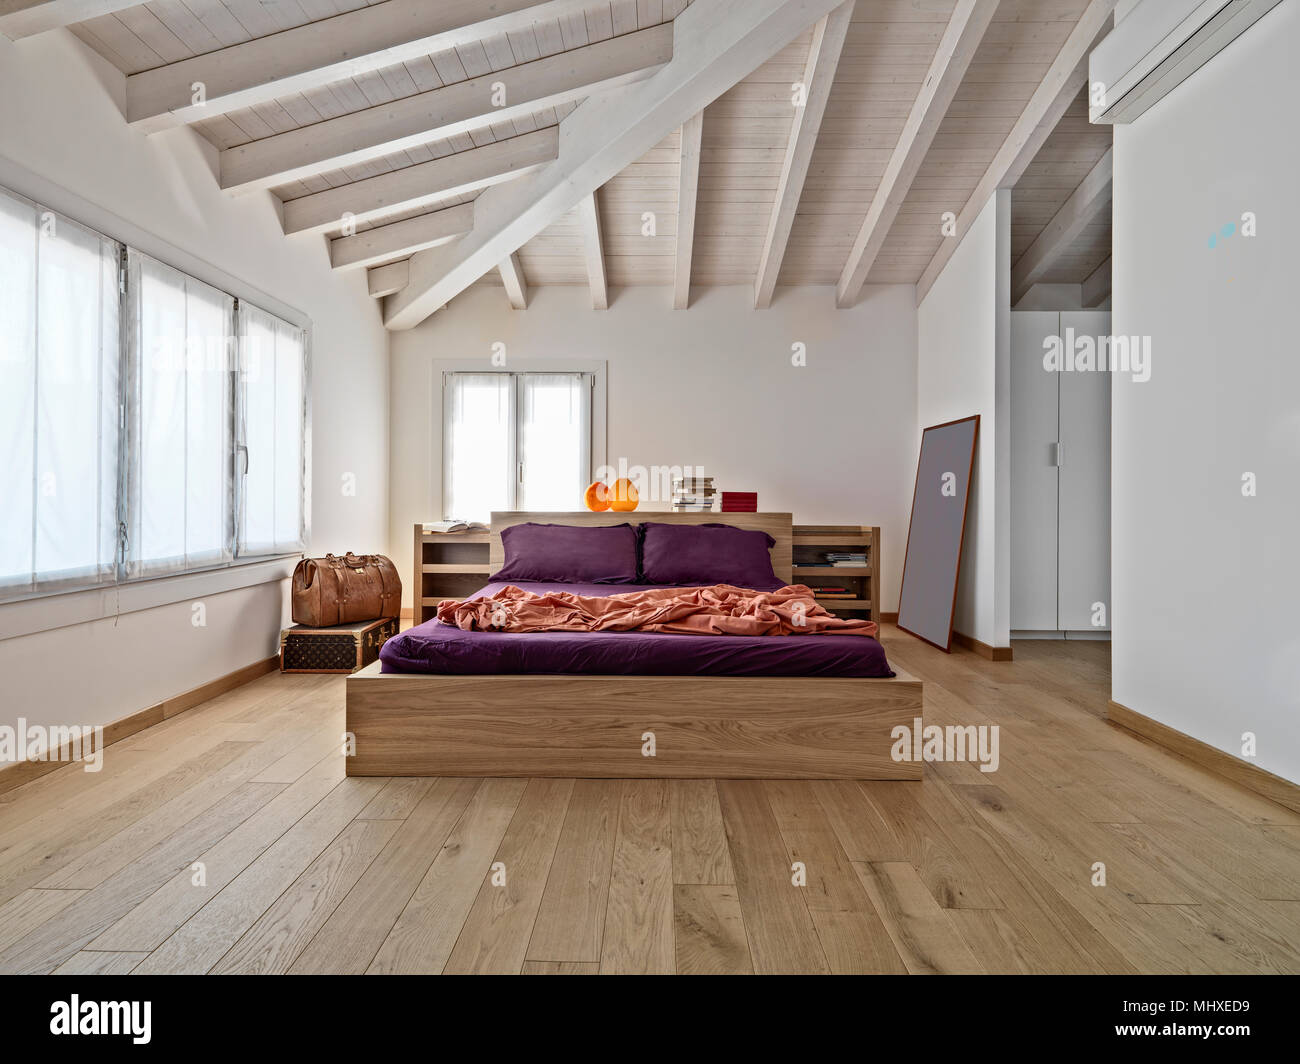 interiors shots of a modern bedroom in the attic room with wooden bed and wooden ceiling Stock Photo